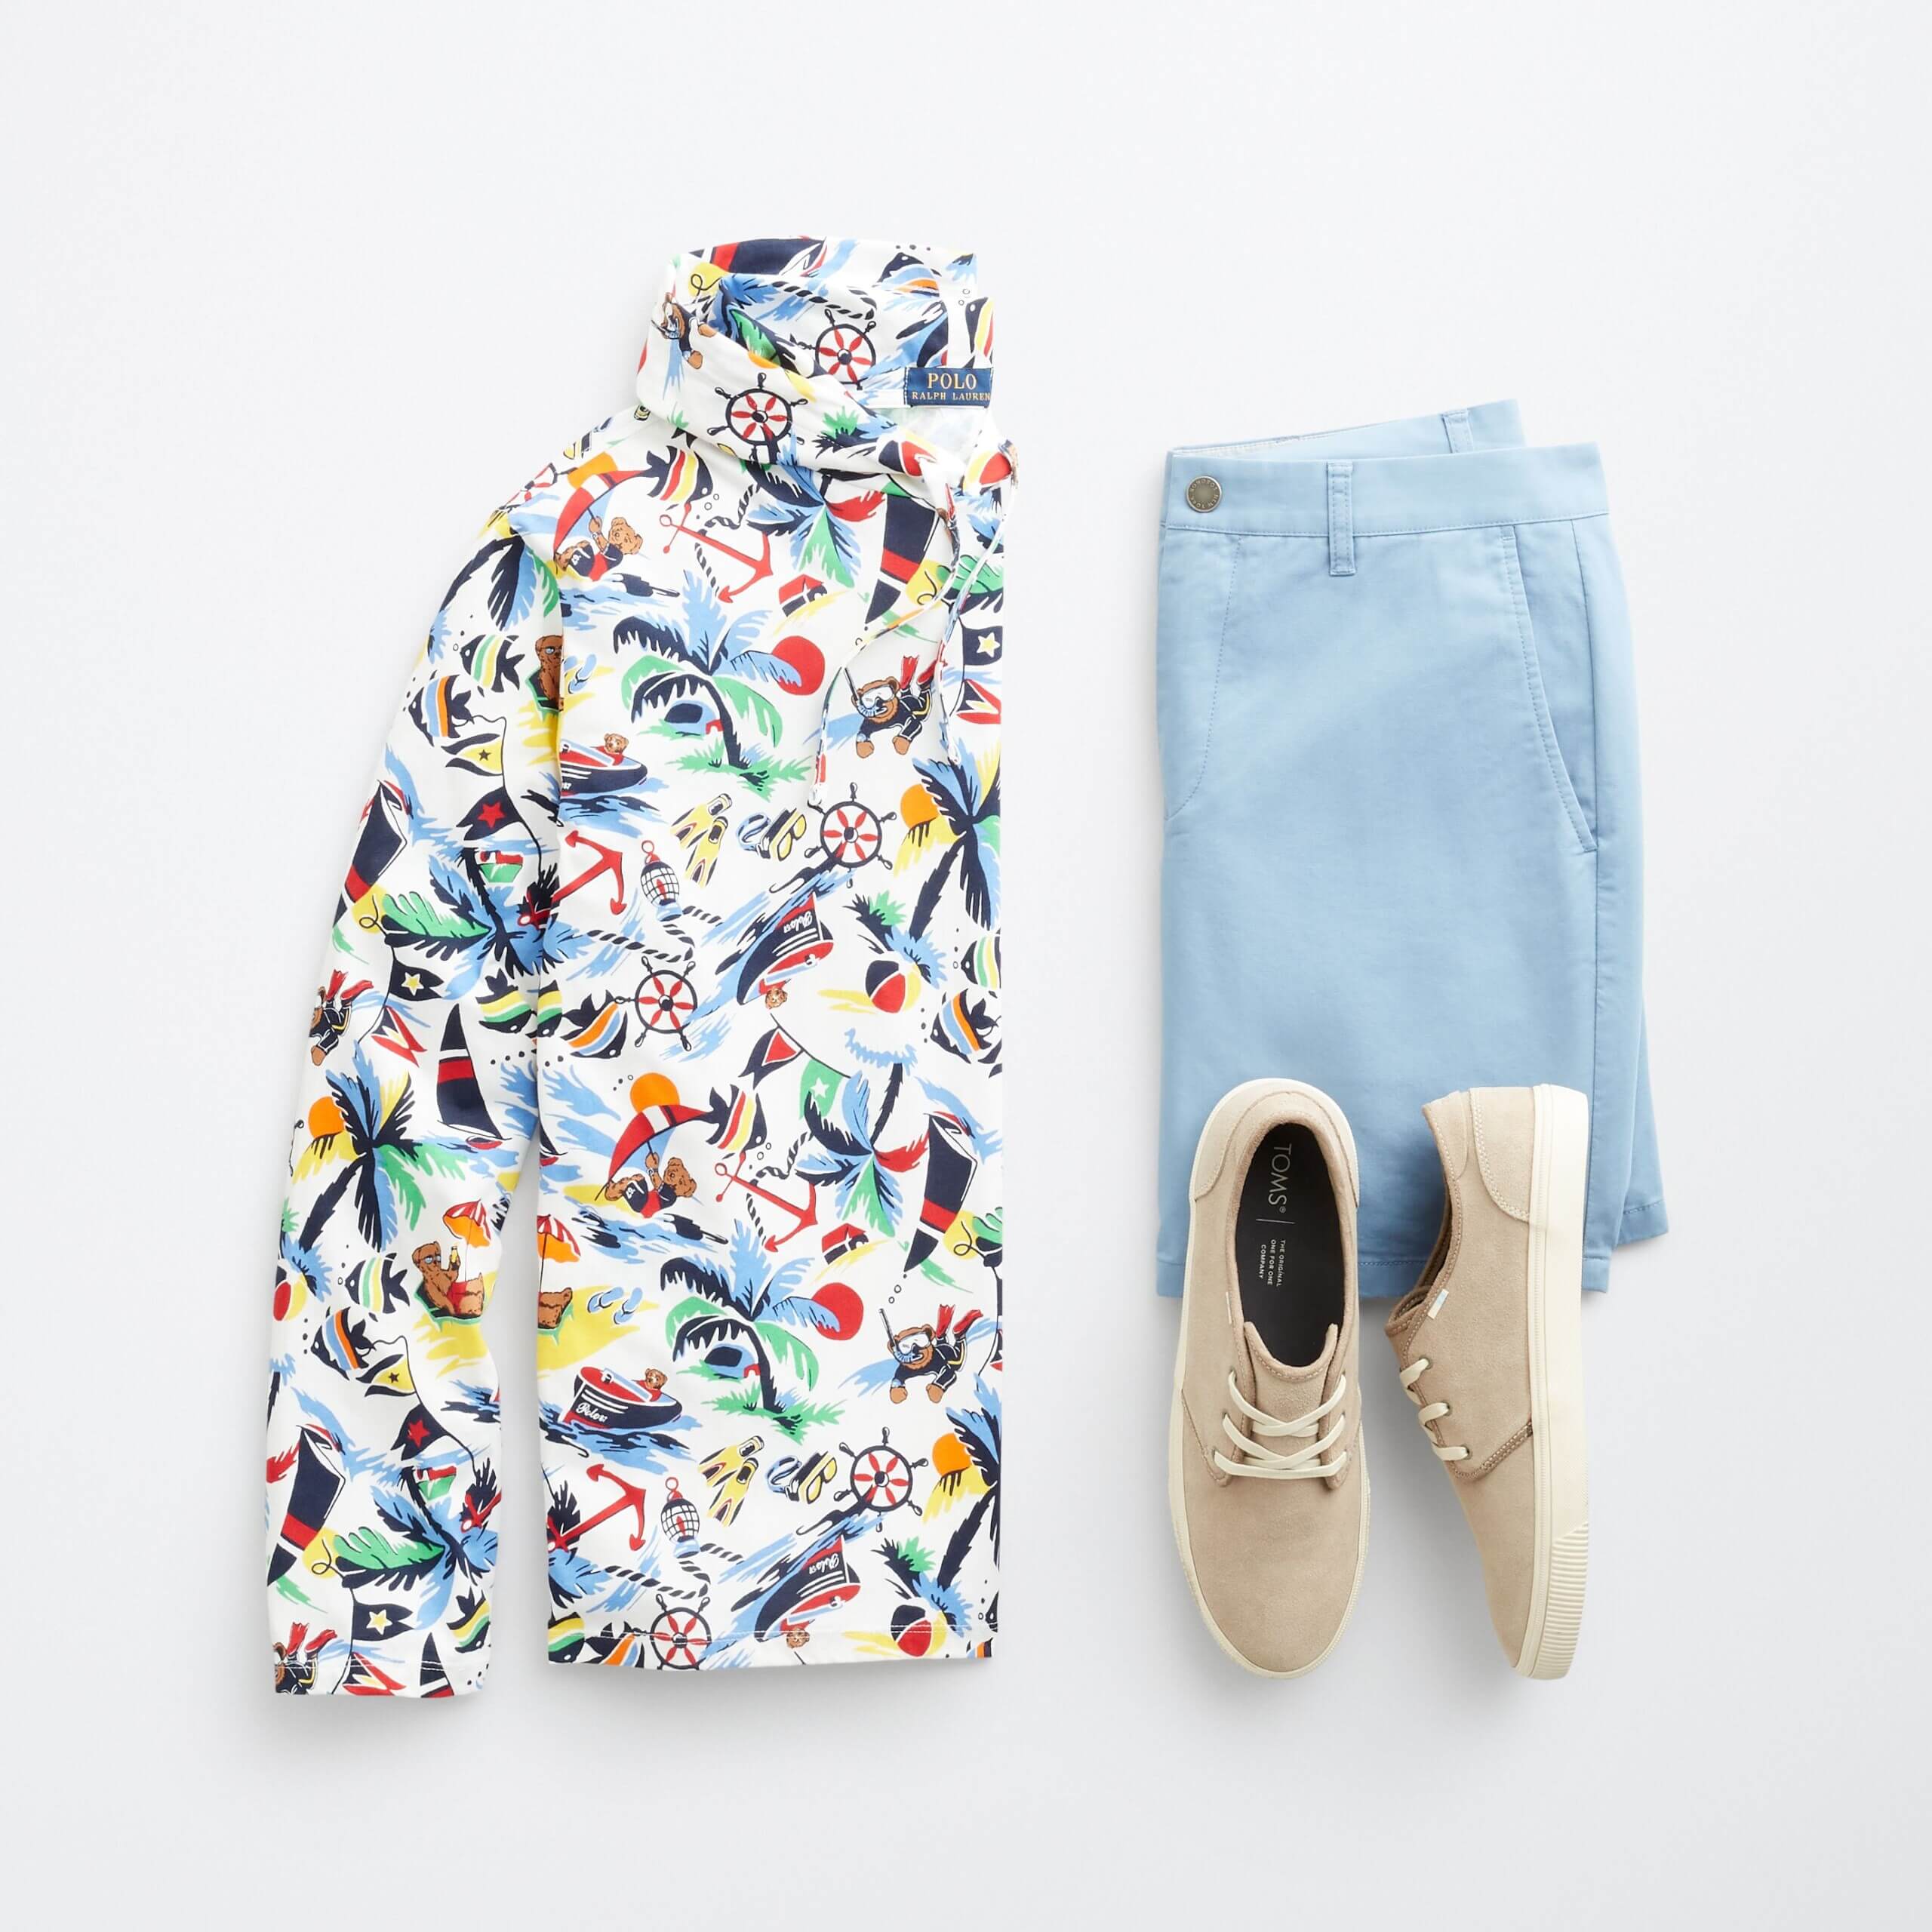 Stitch Fix men's outfit laydown featuring tropical print hooded tee, baby blue shorts and tan sneakers. 